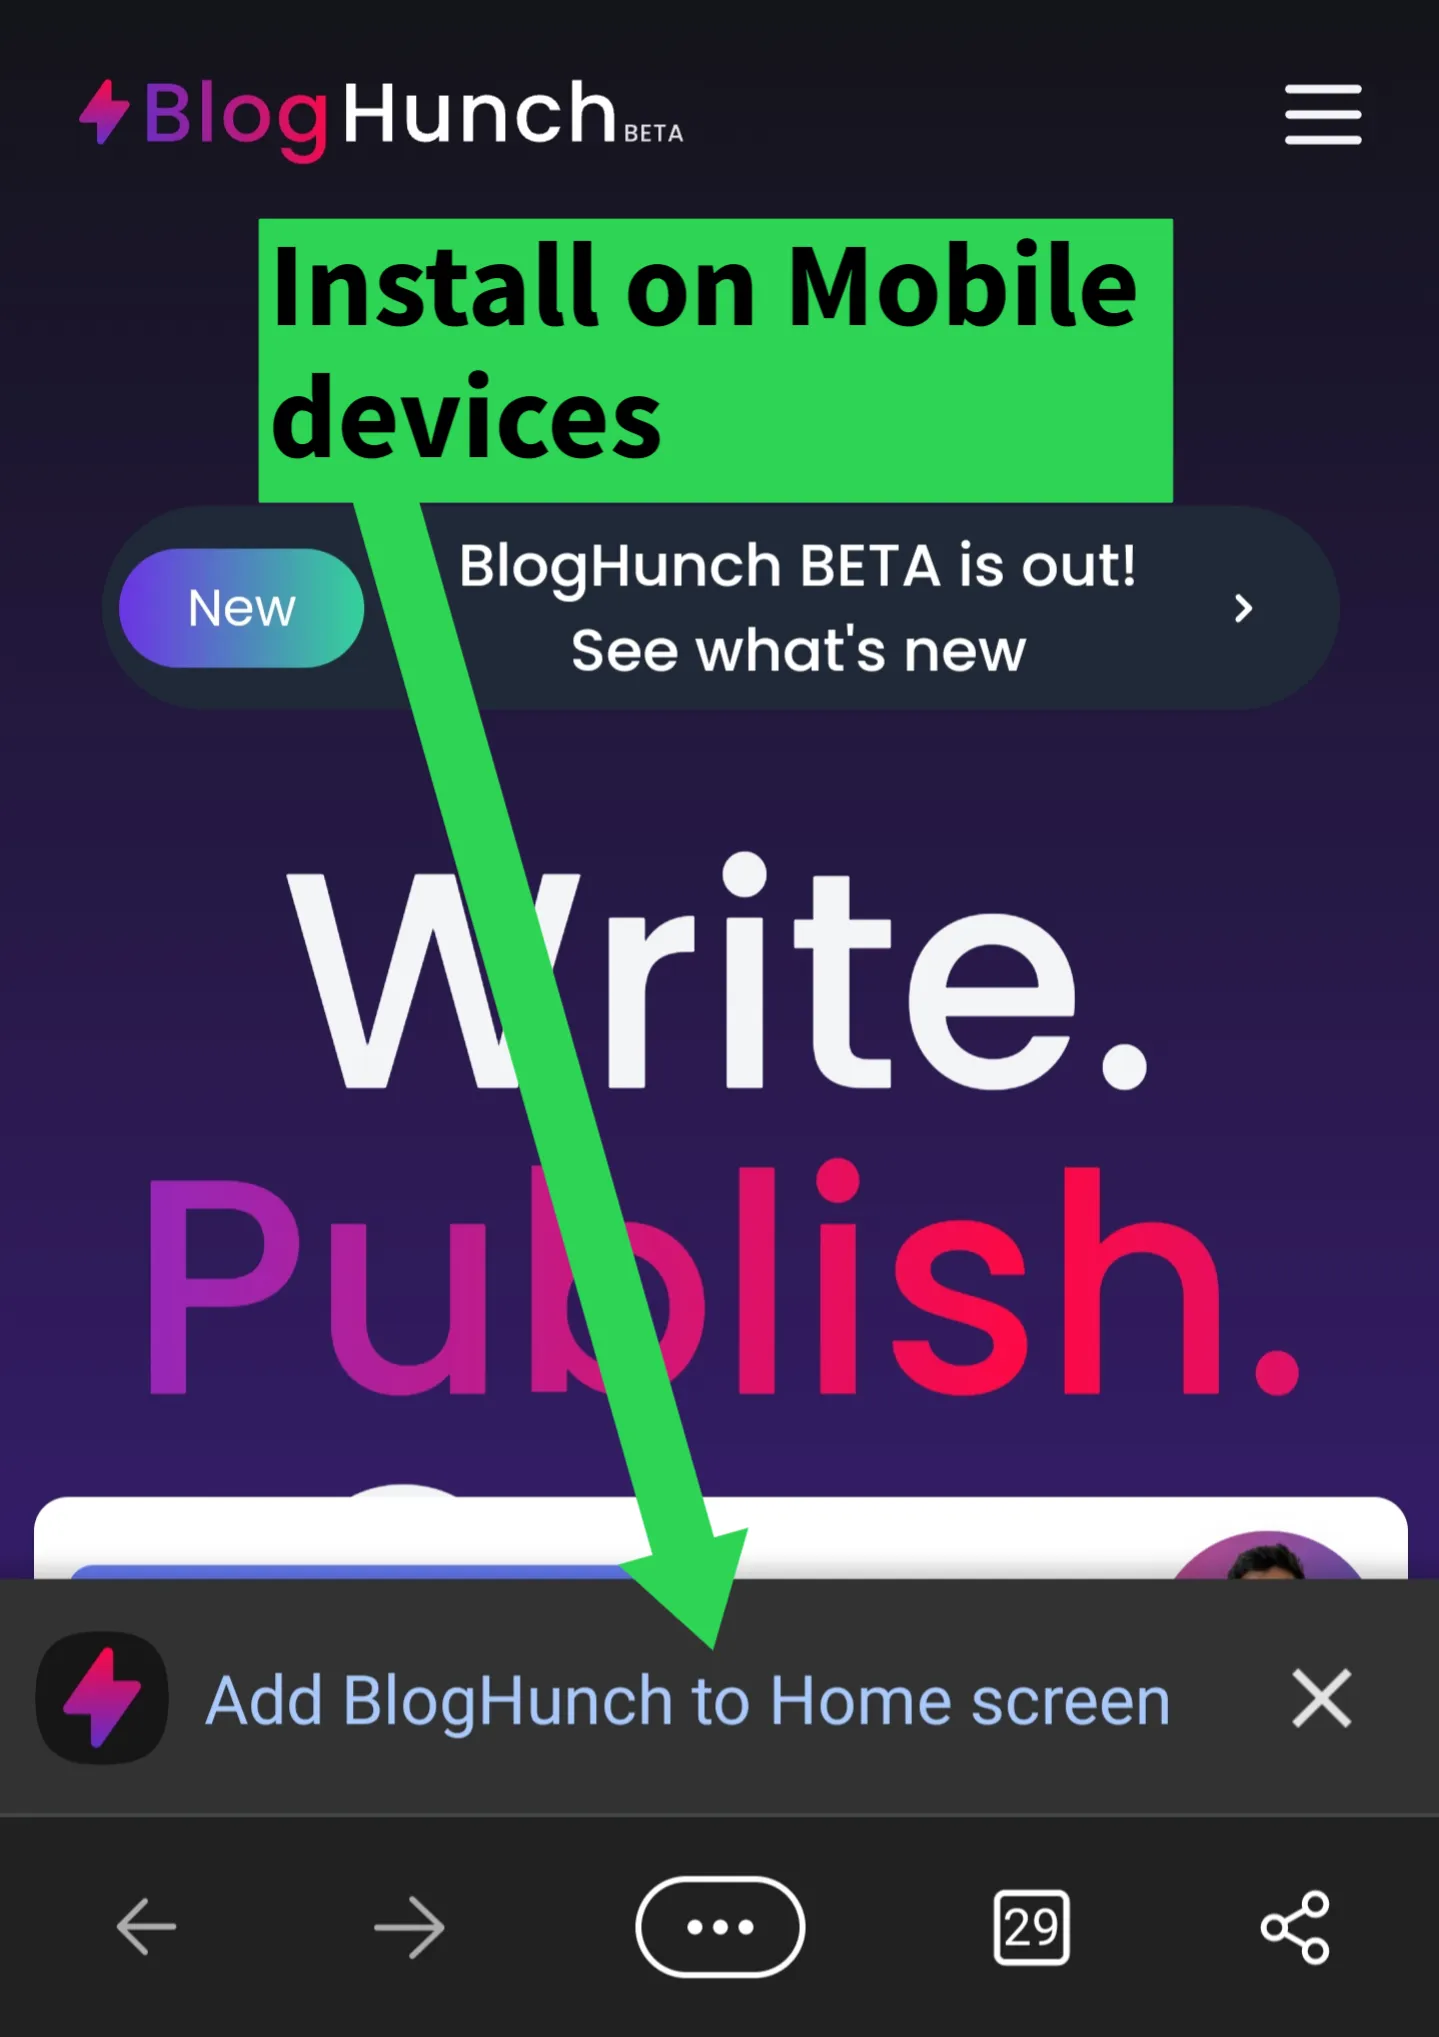 Install BlogHunch on mobile devices